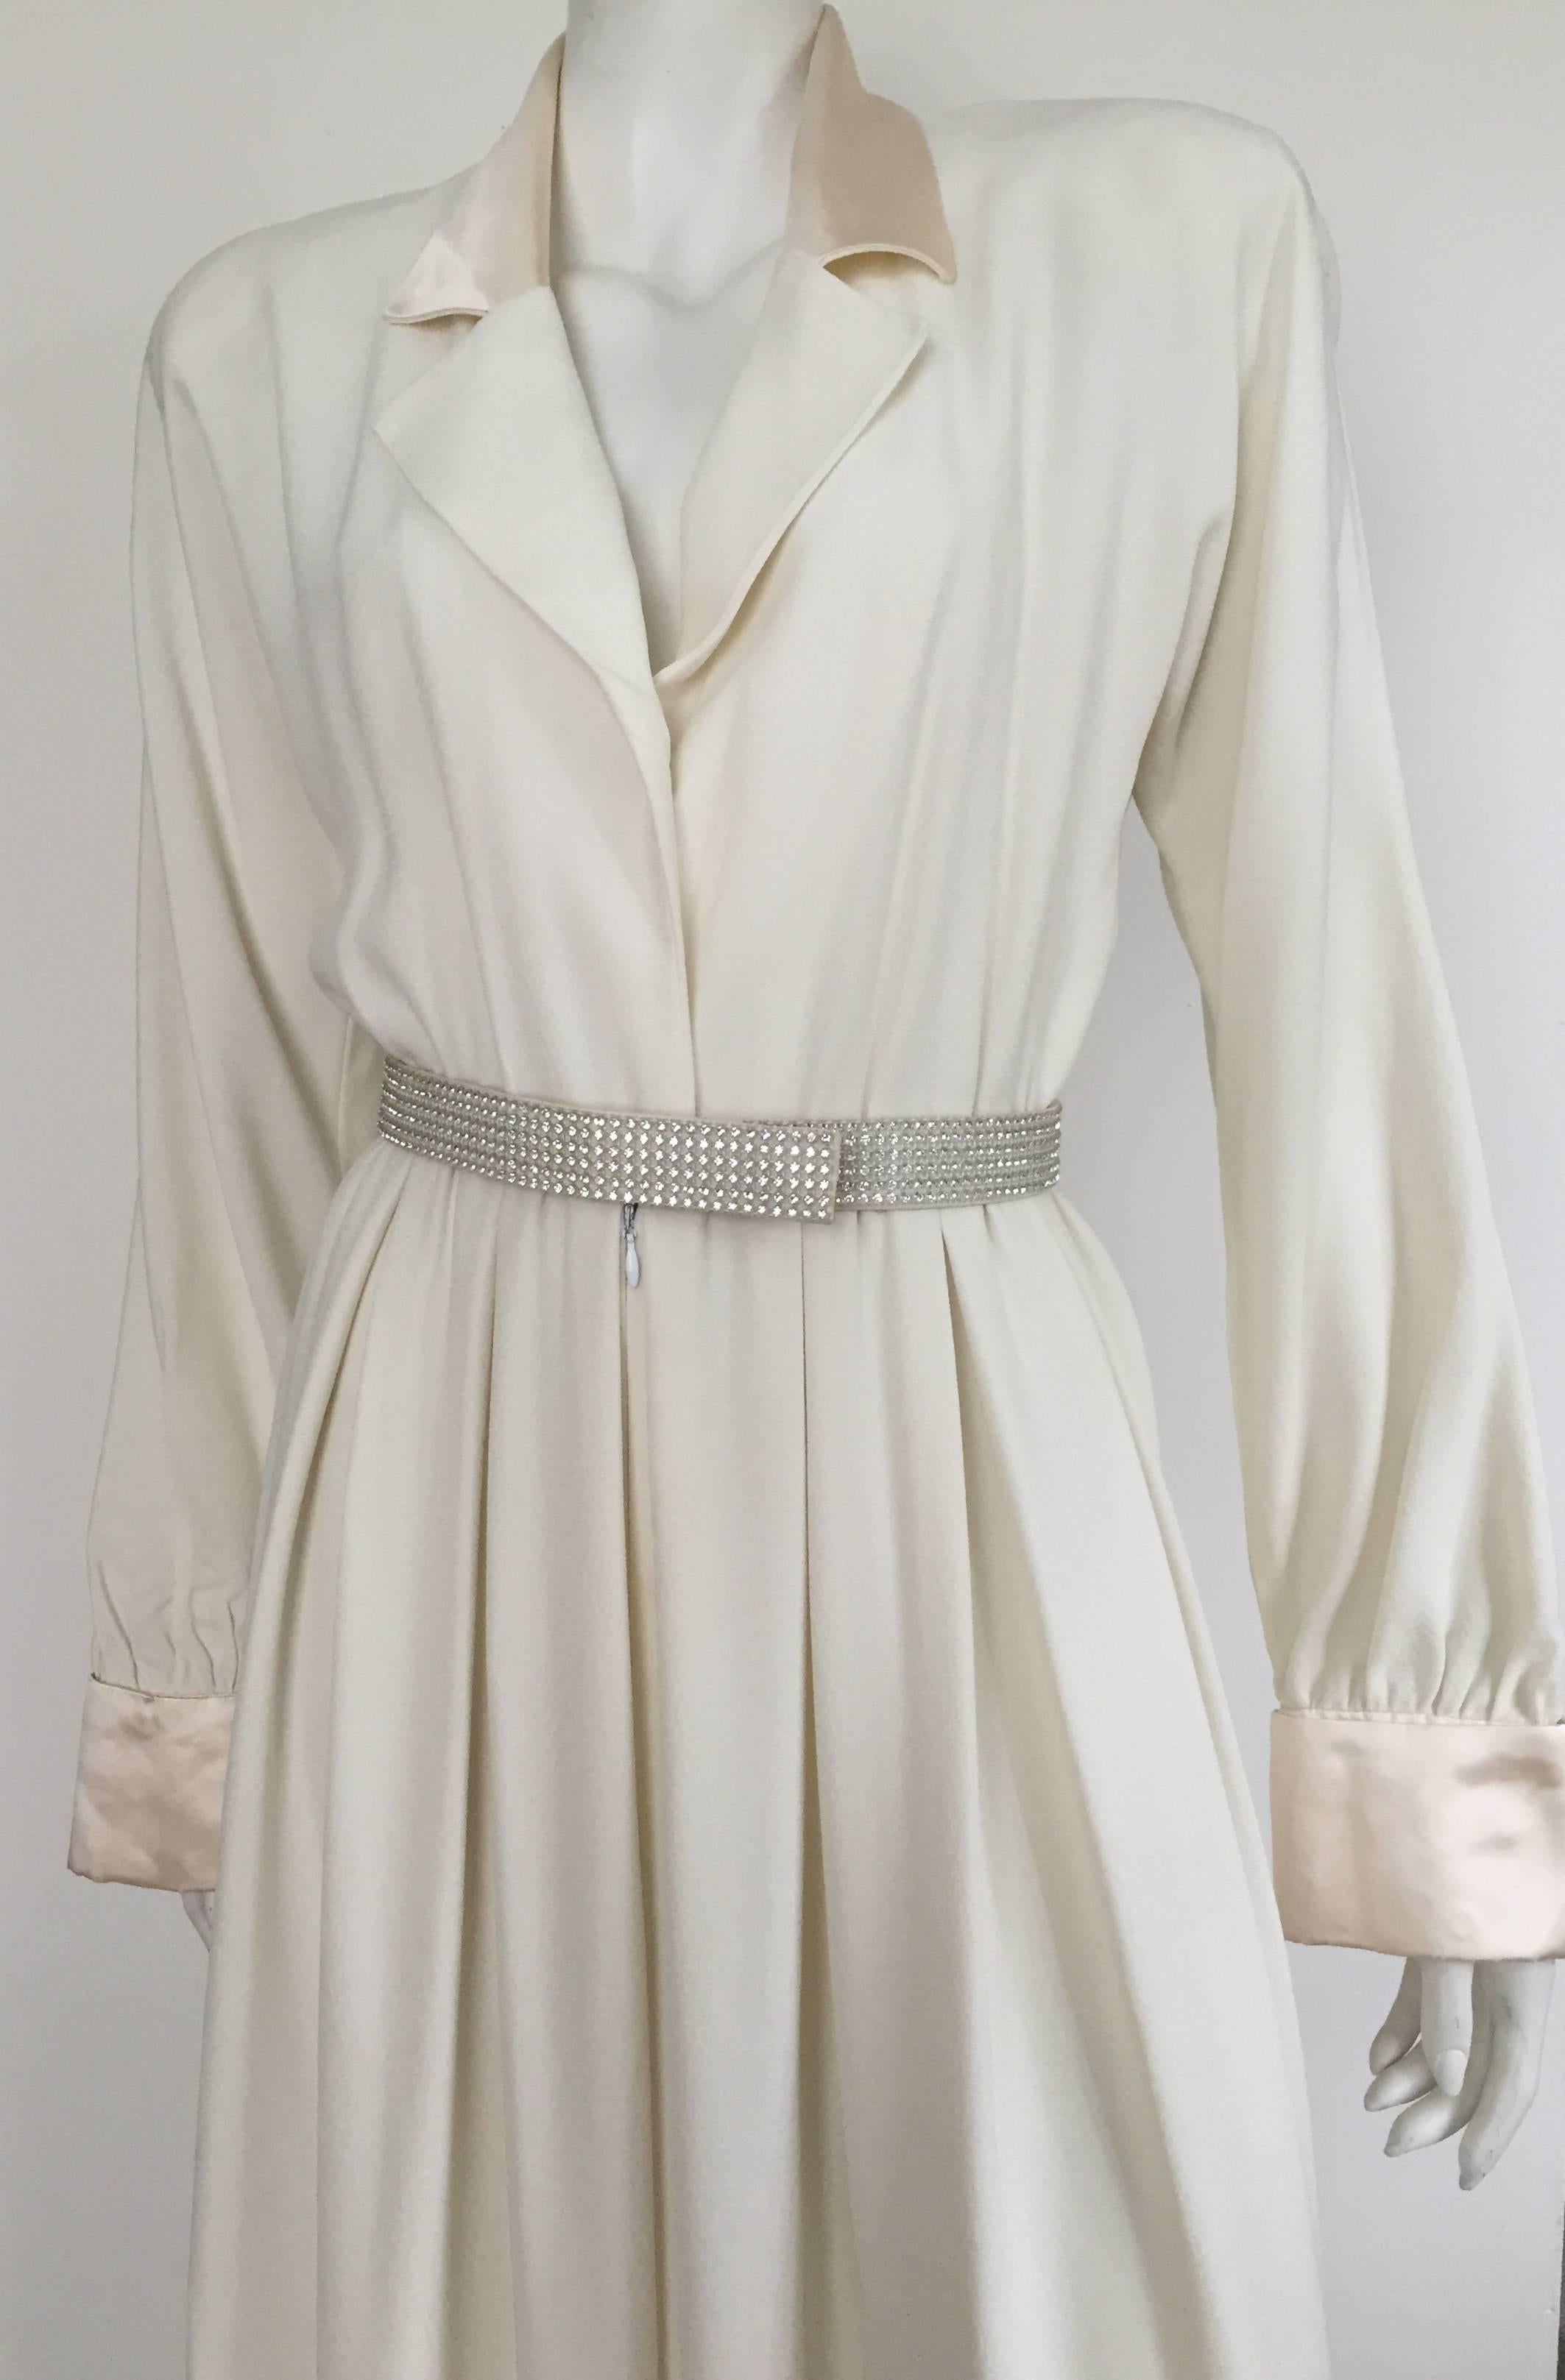 Carolyne Roehm 1980s elegant cream wool crepe tuxedo jumpsuit with rhinestone belt size 4. Silk collar - lapel  - cuff give this very chic jumpsuit its sophisticated look. Shoulder pads and is completely lined. 
Someone call Joan Crawford and let